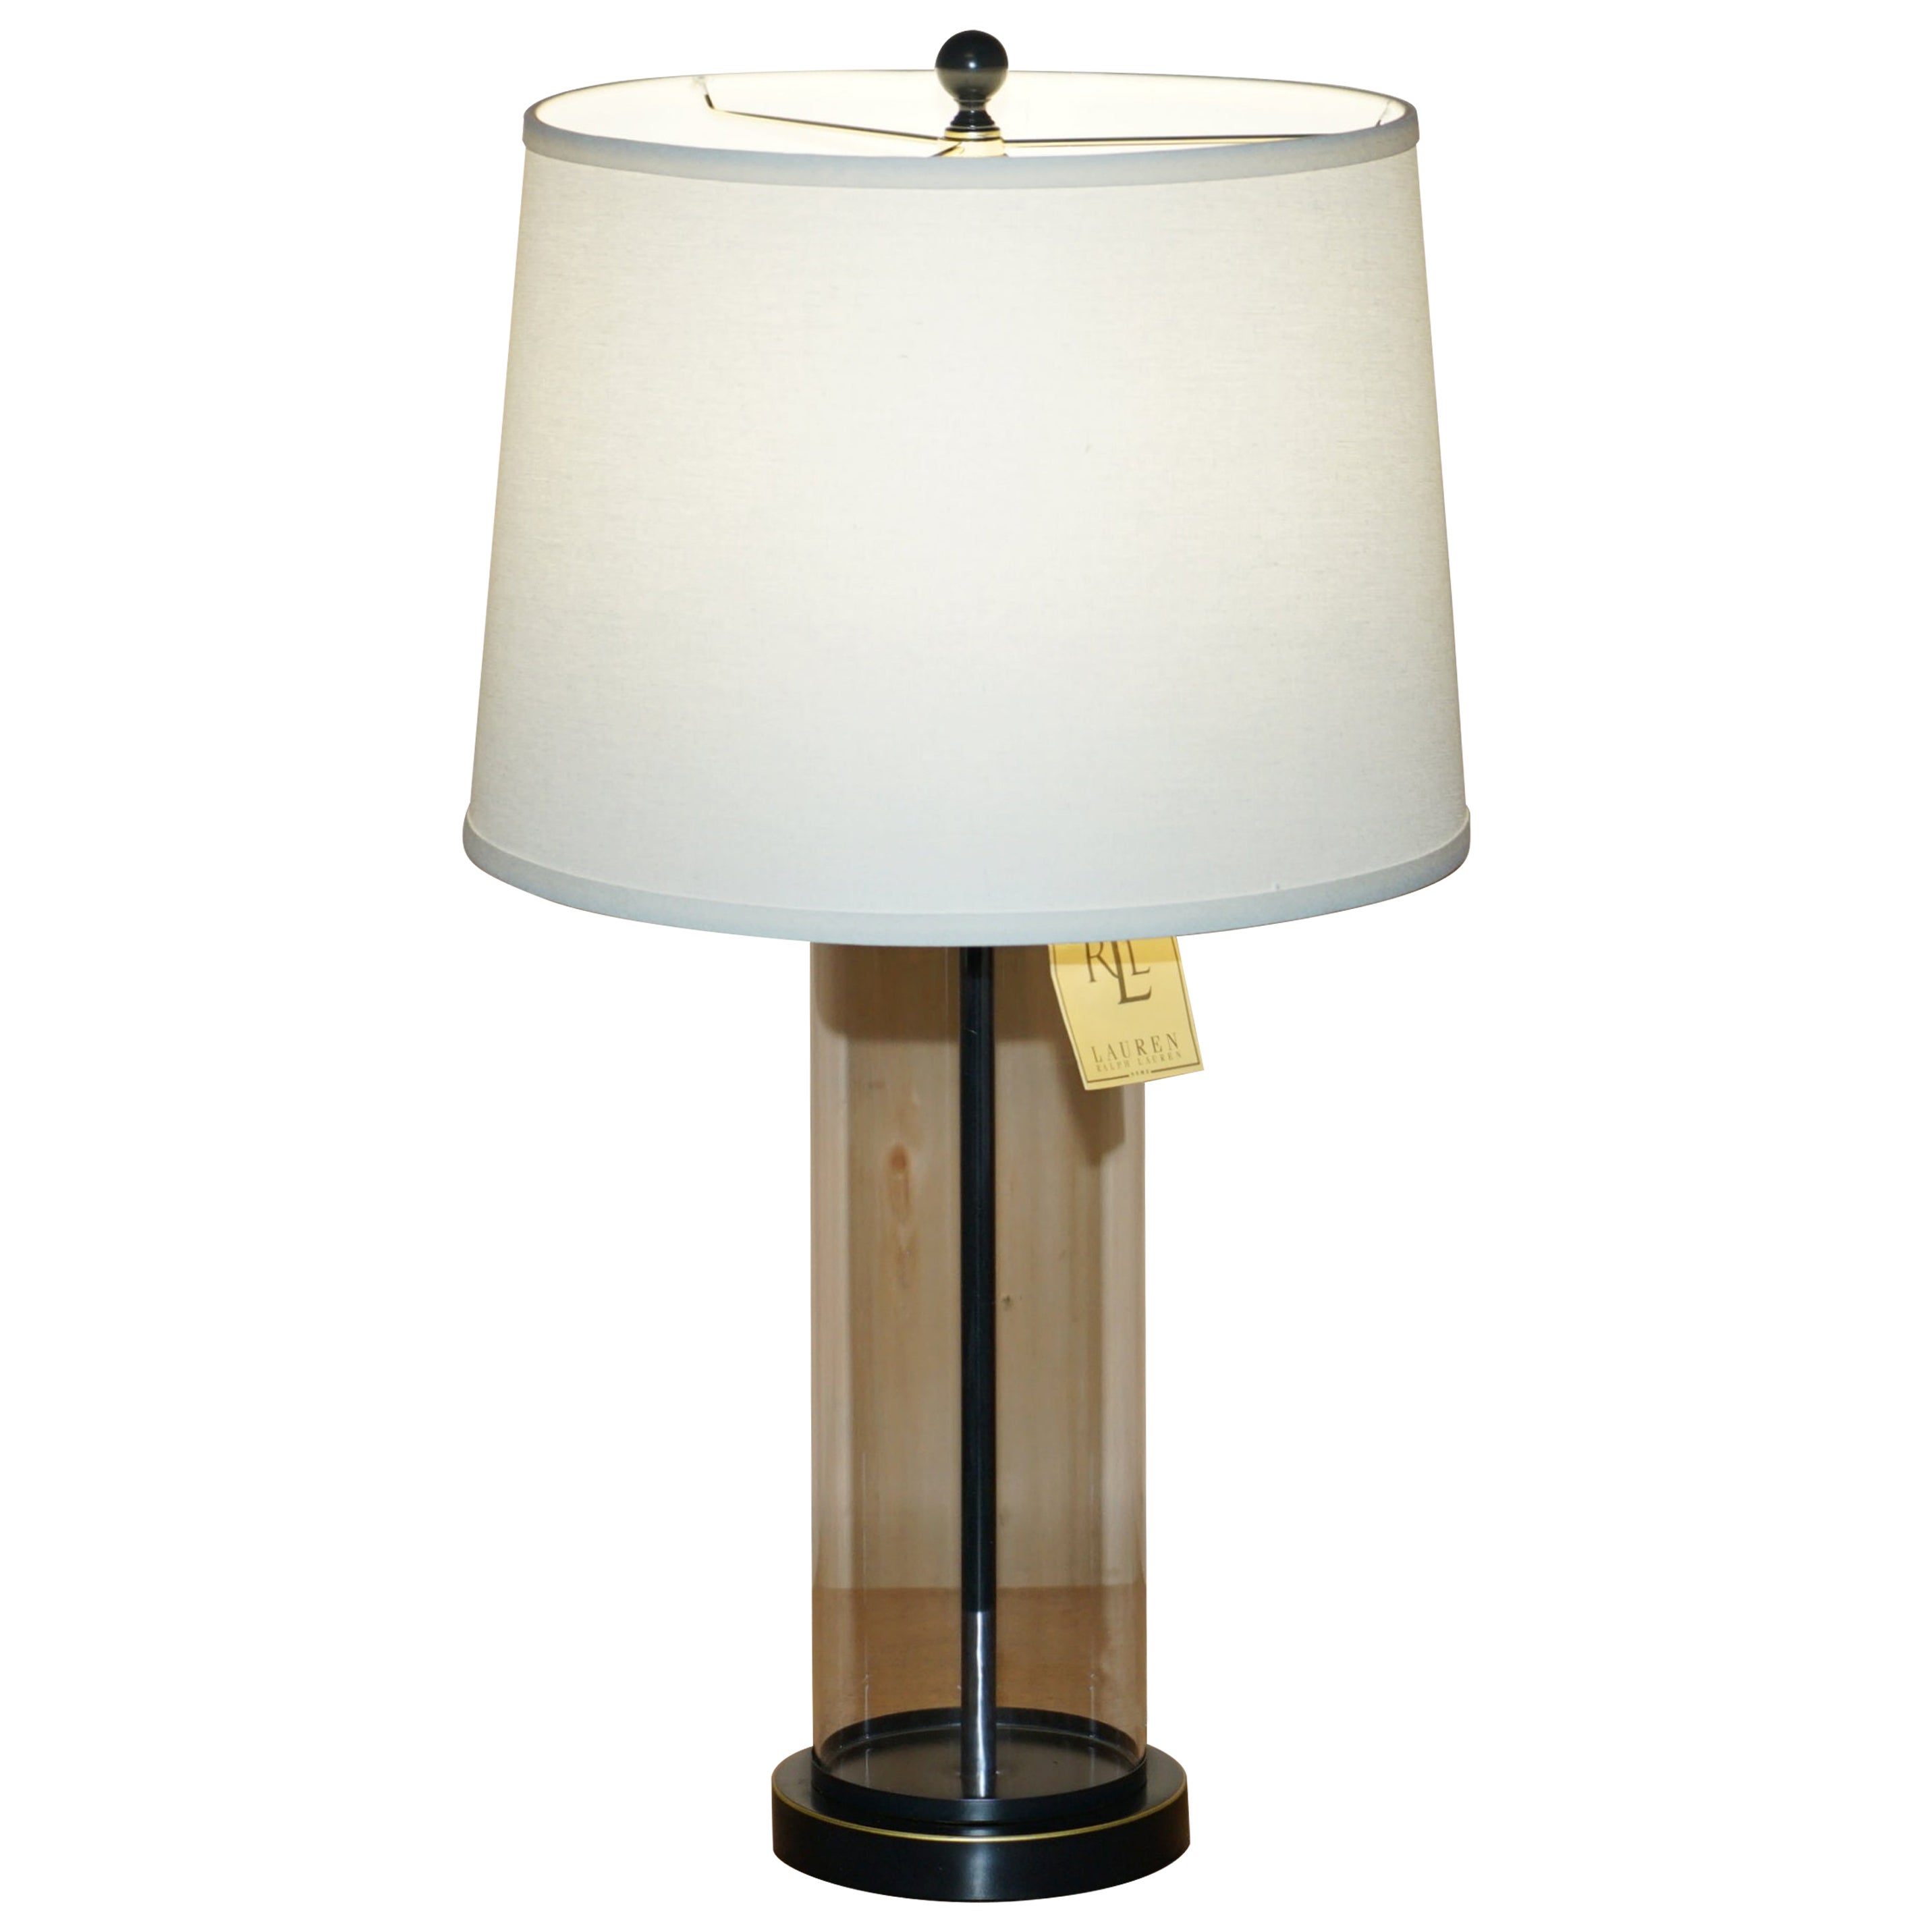 1 OF 2 BRAND NEW IN THE BOX RALPH LAUREN NAVY STORM LANTERN GLASS TABLE LAMPs